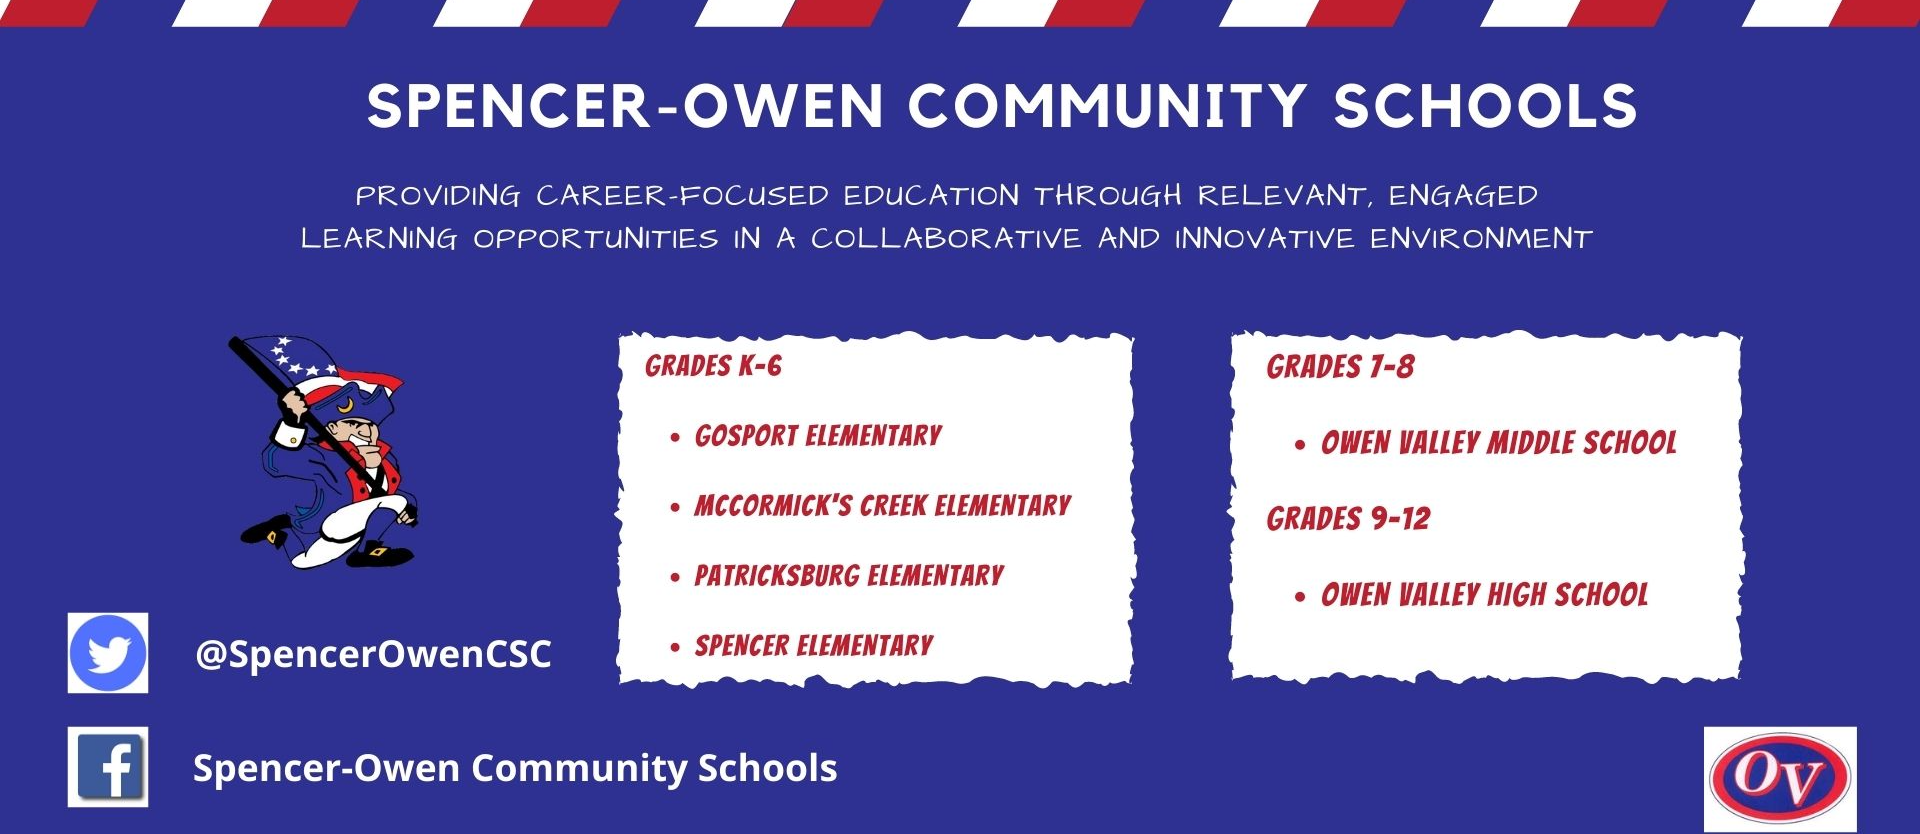 Spencer-Owen Community Schools is located in Spencer, Indiana.